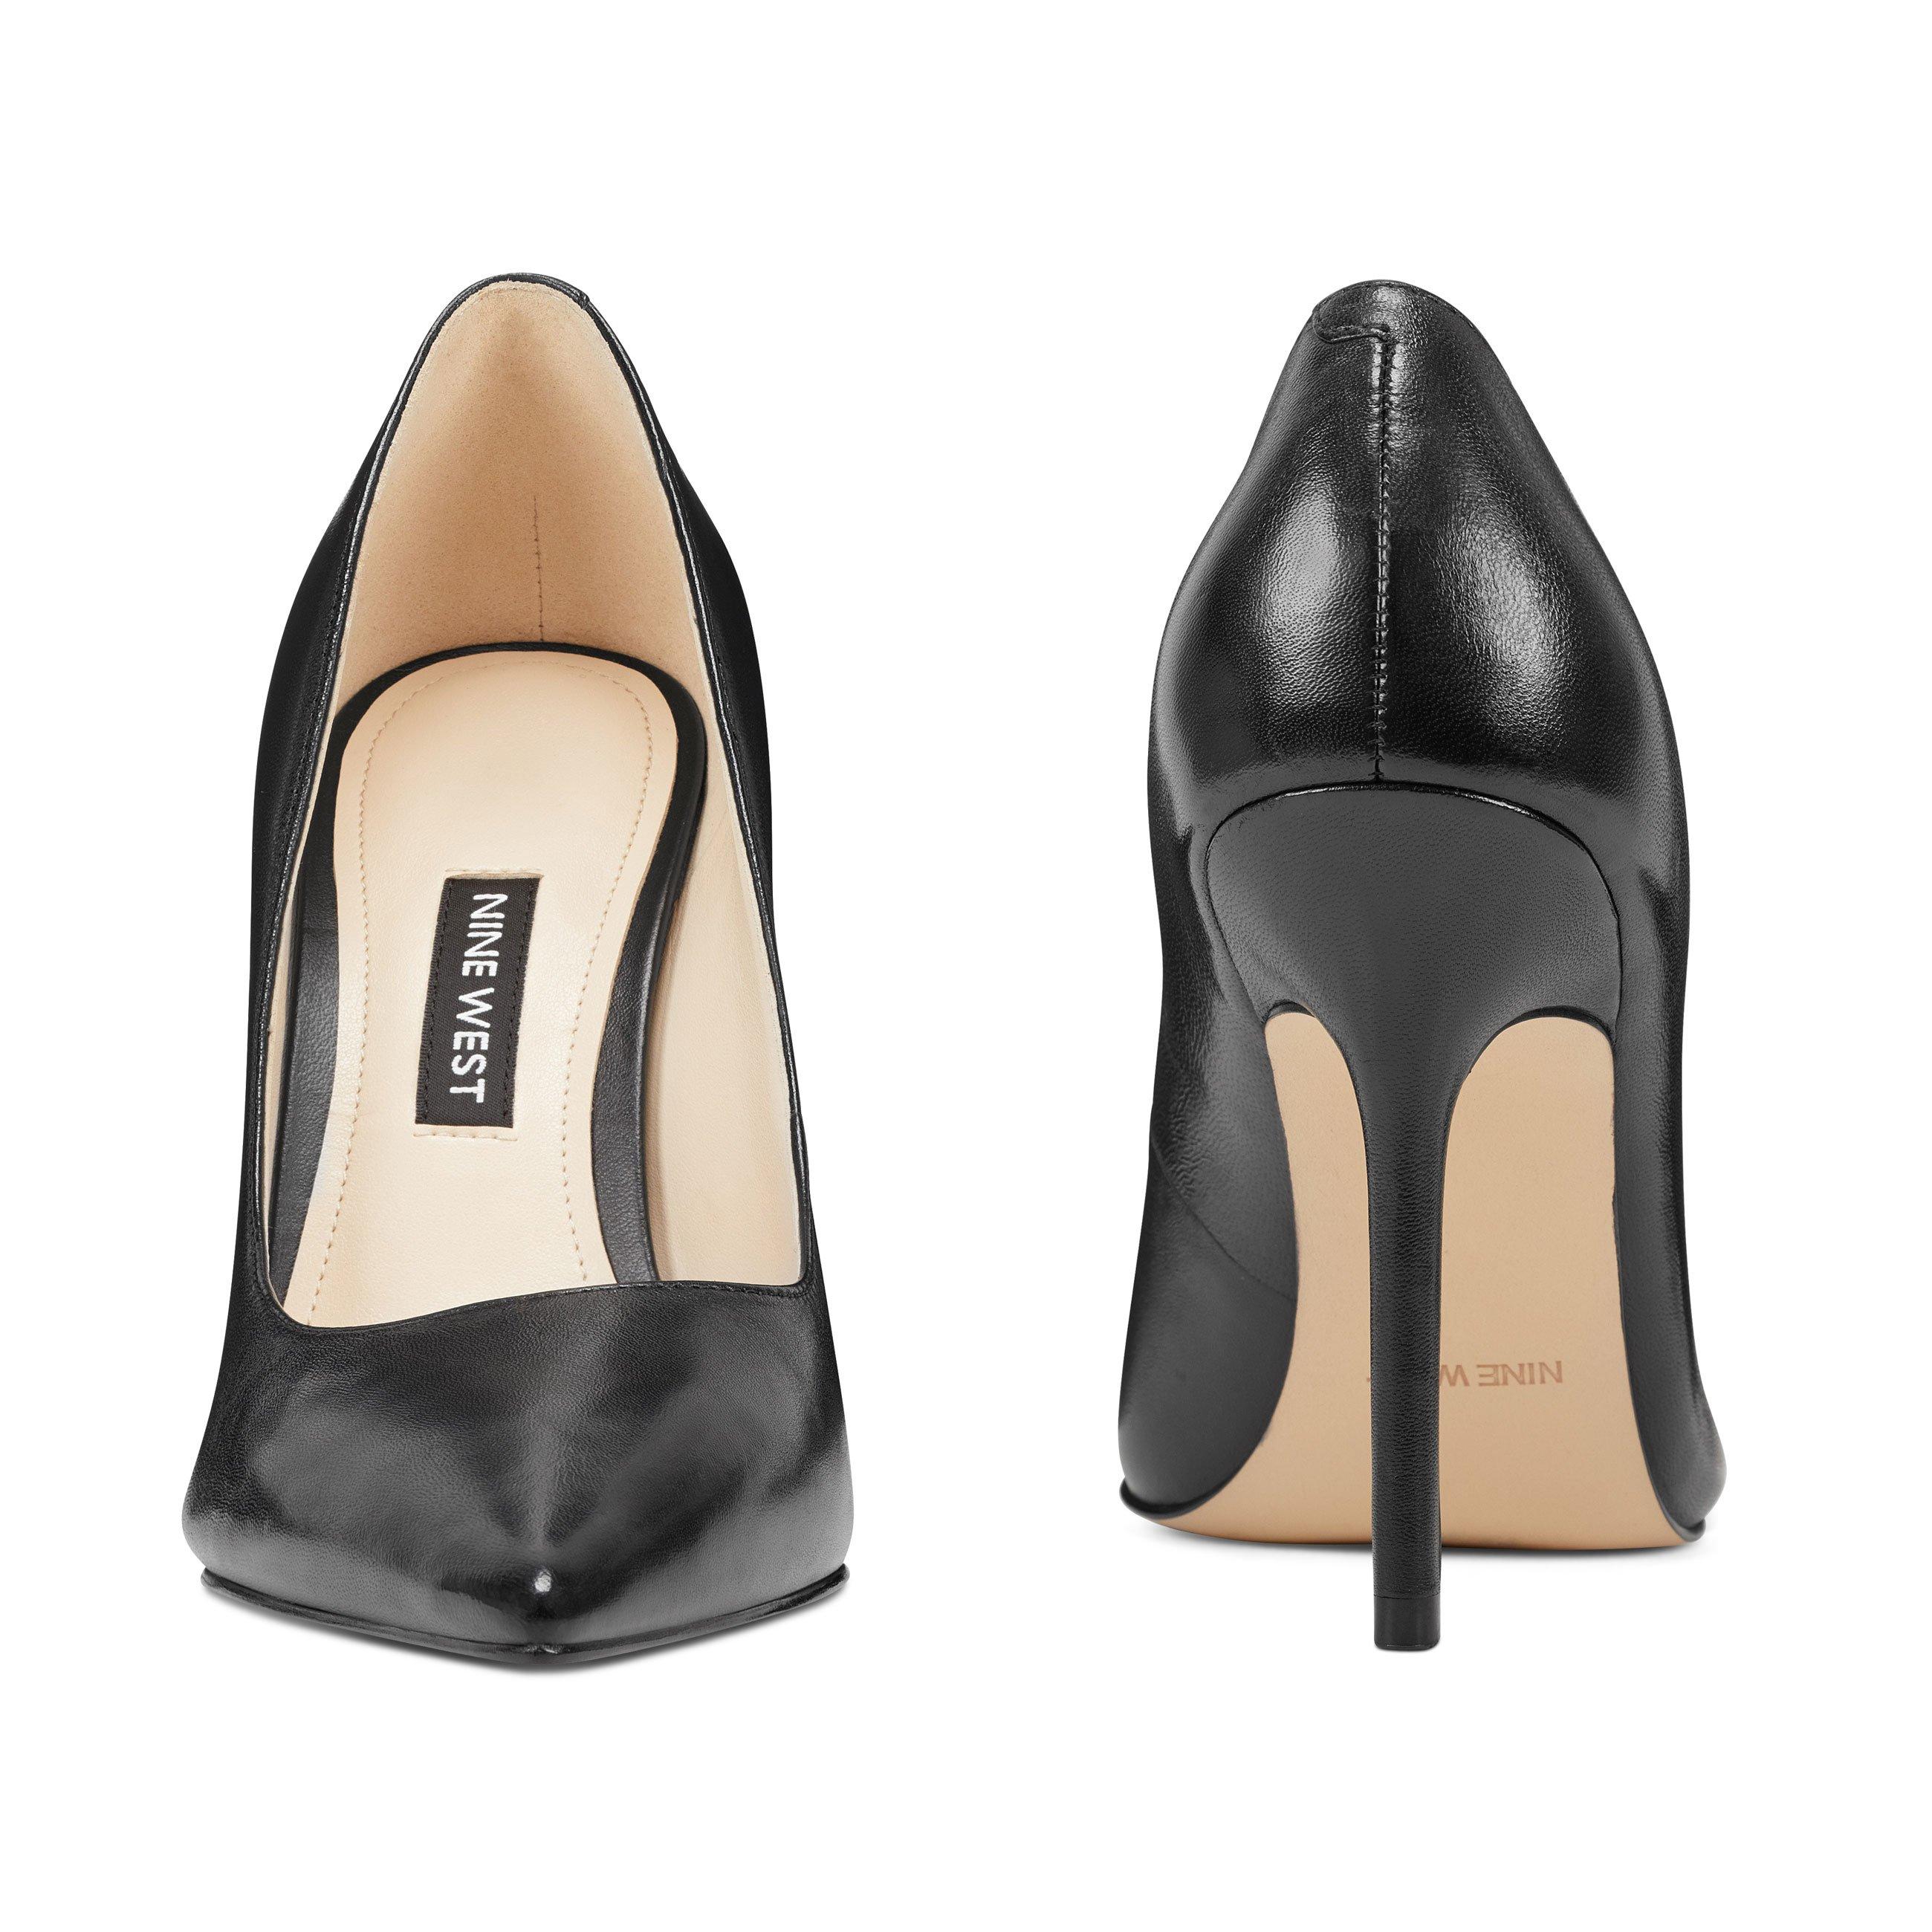 Nine West Bliss Pointy Toe Pumps in Black Leather (Black) - Lyst